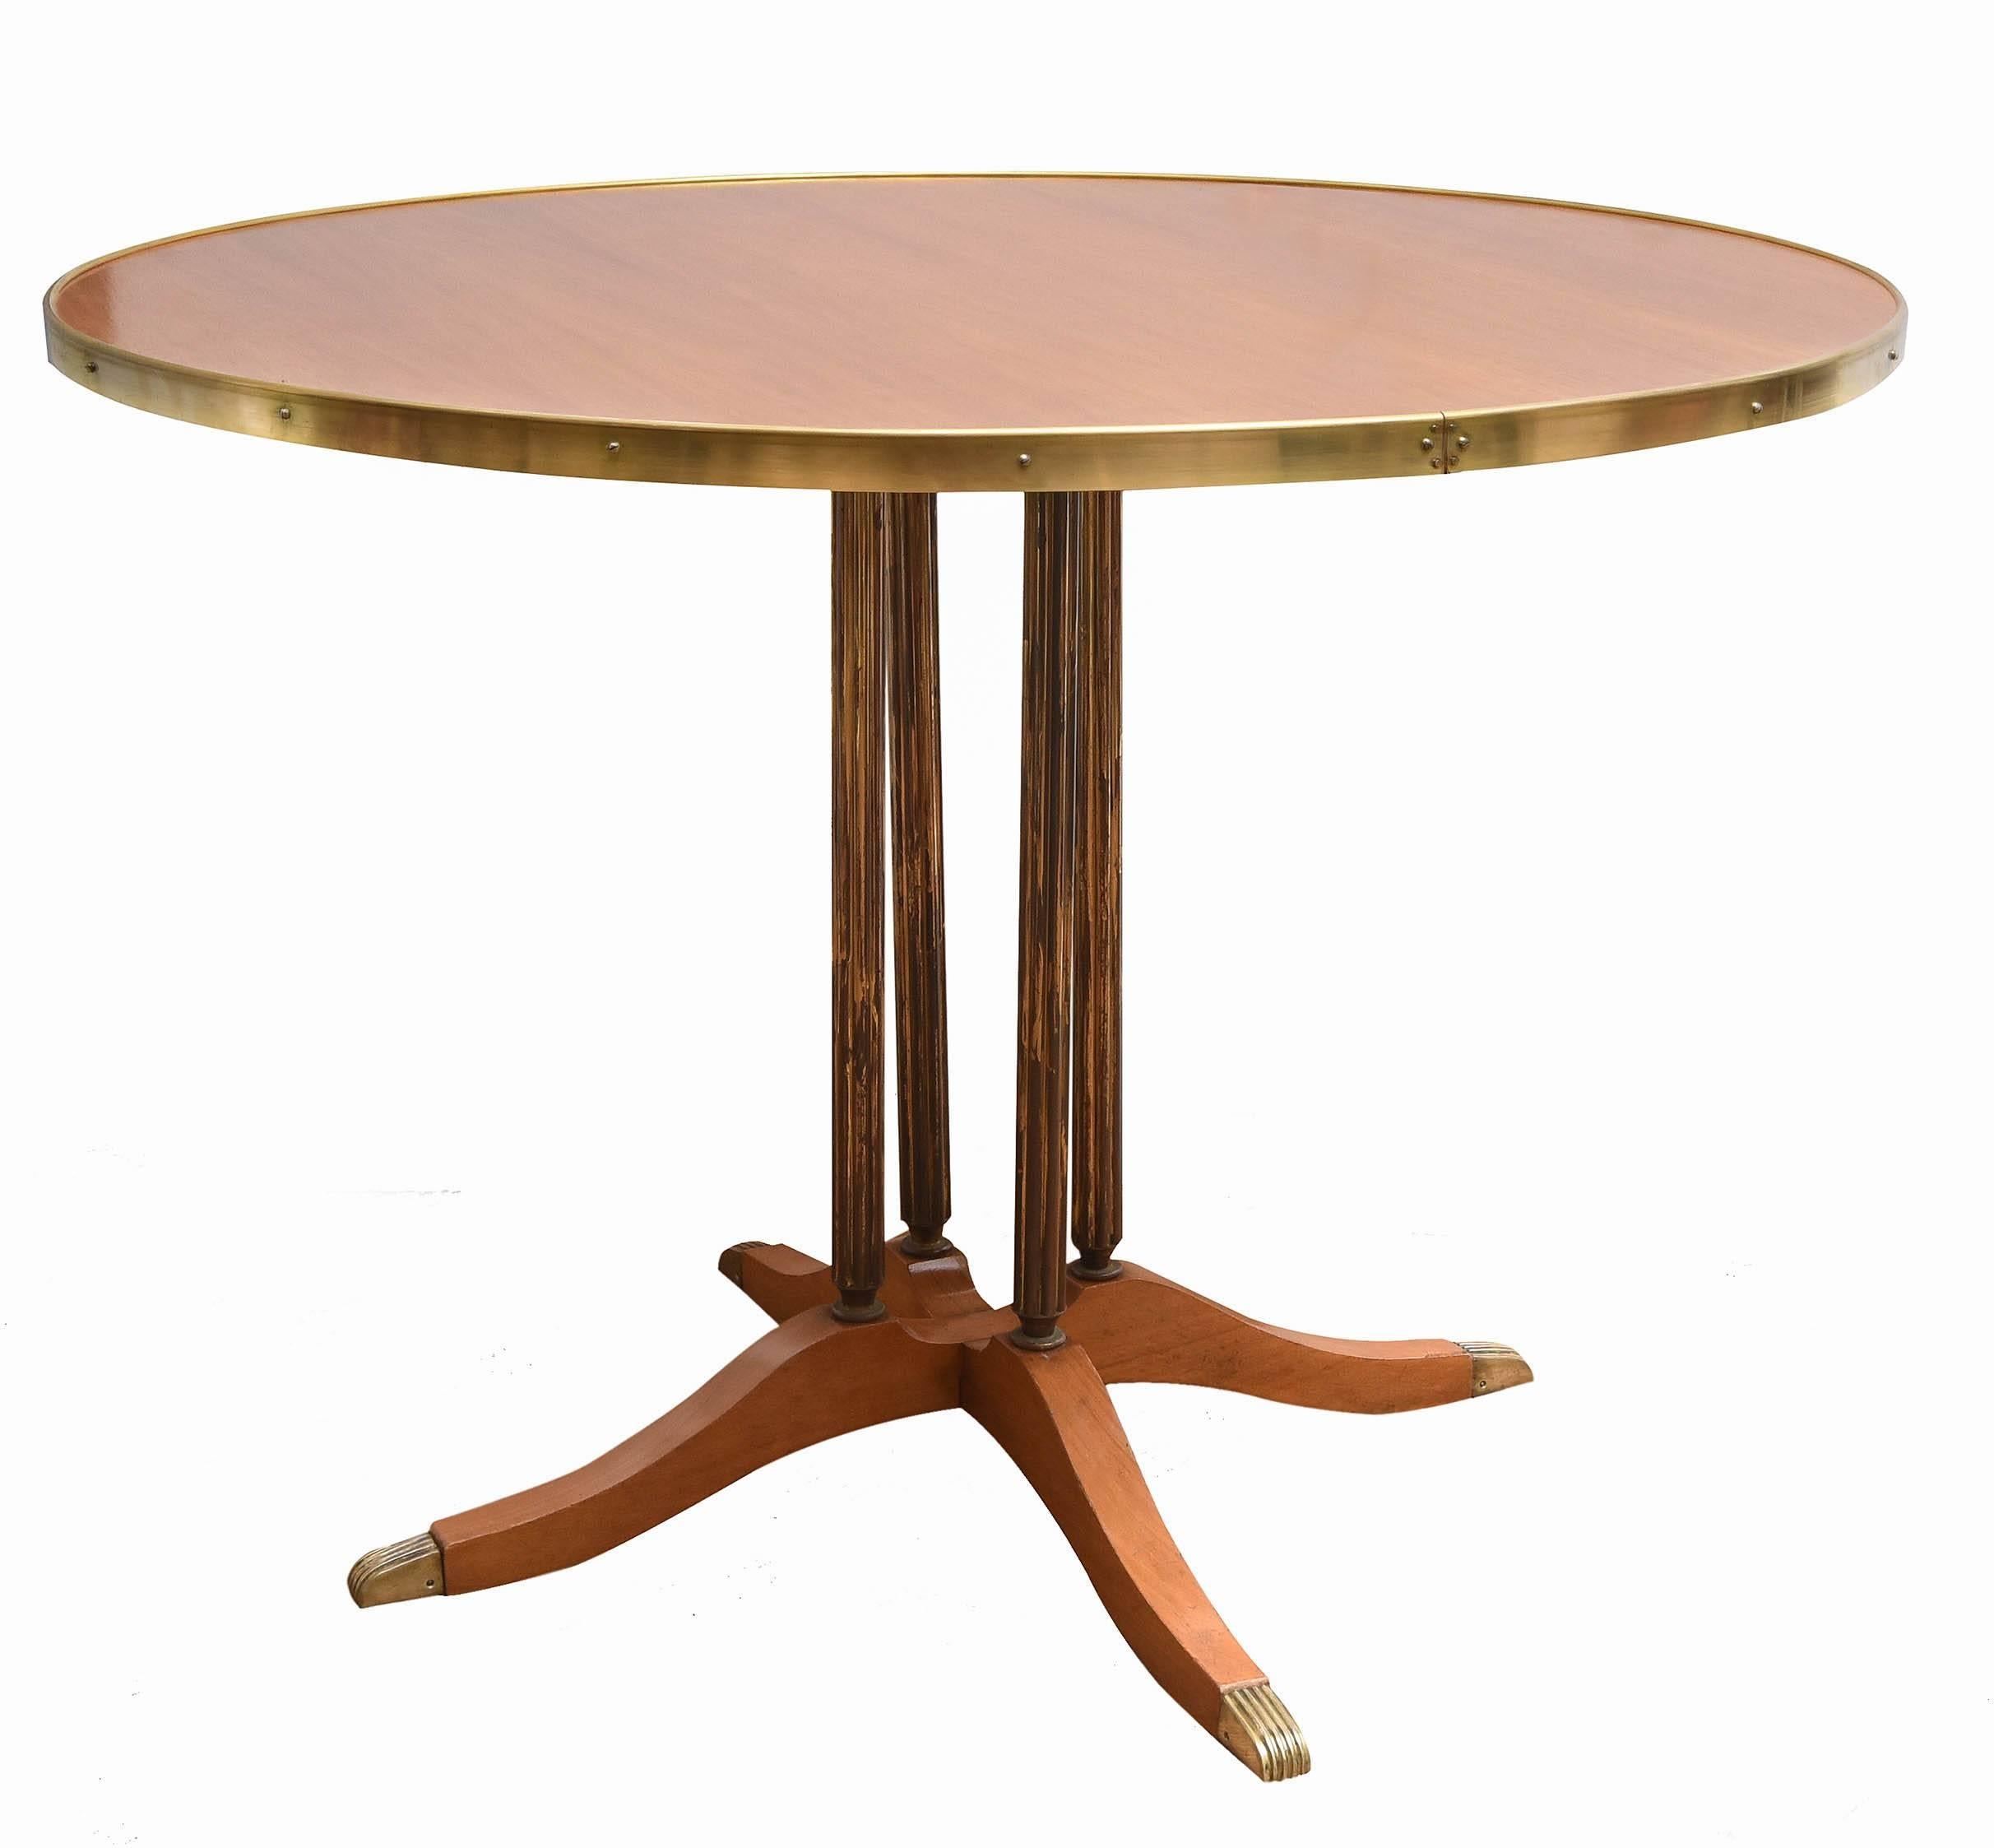 Round table with brass columns.